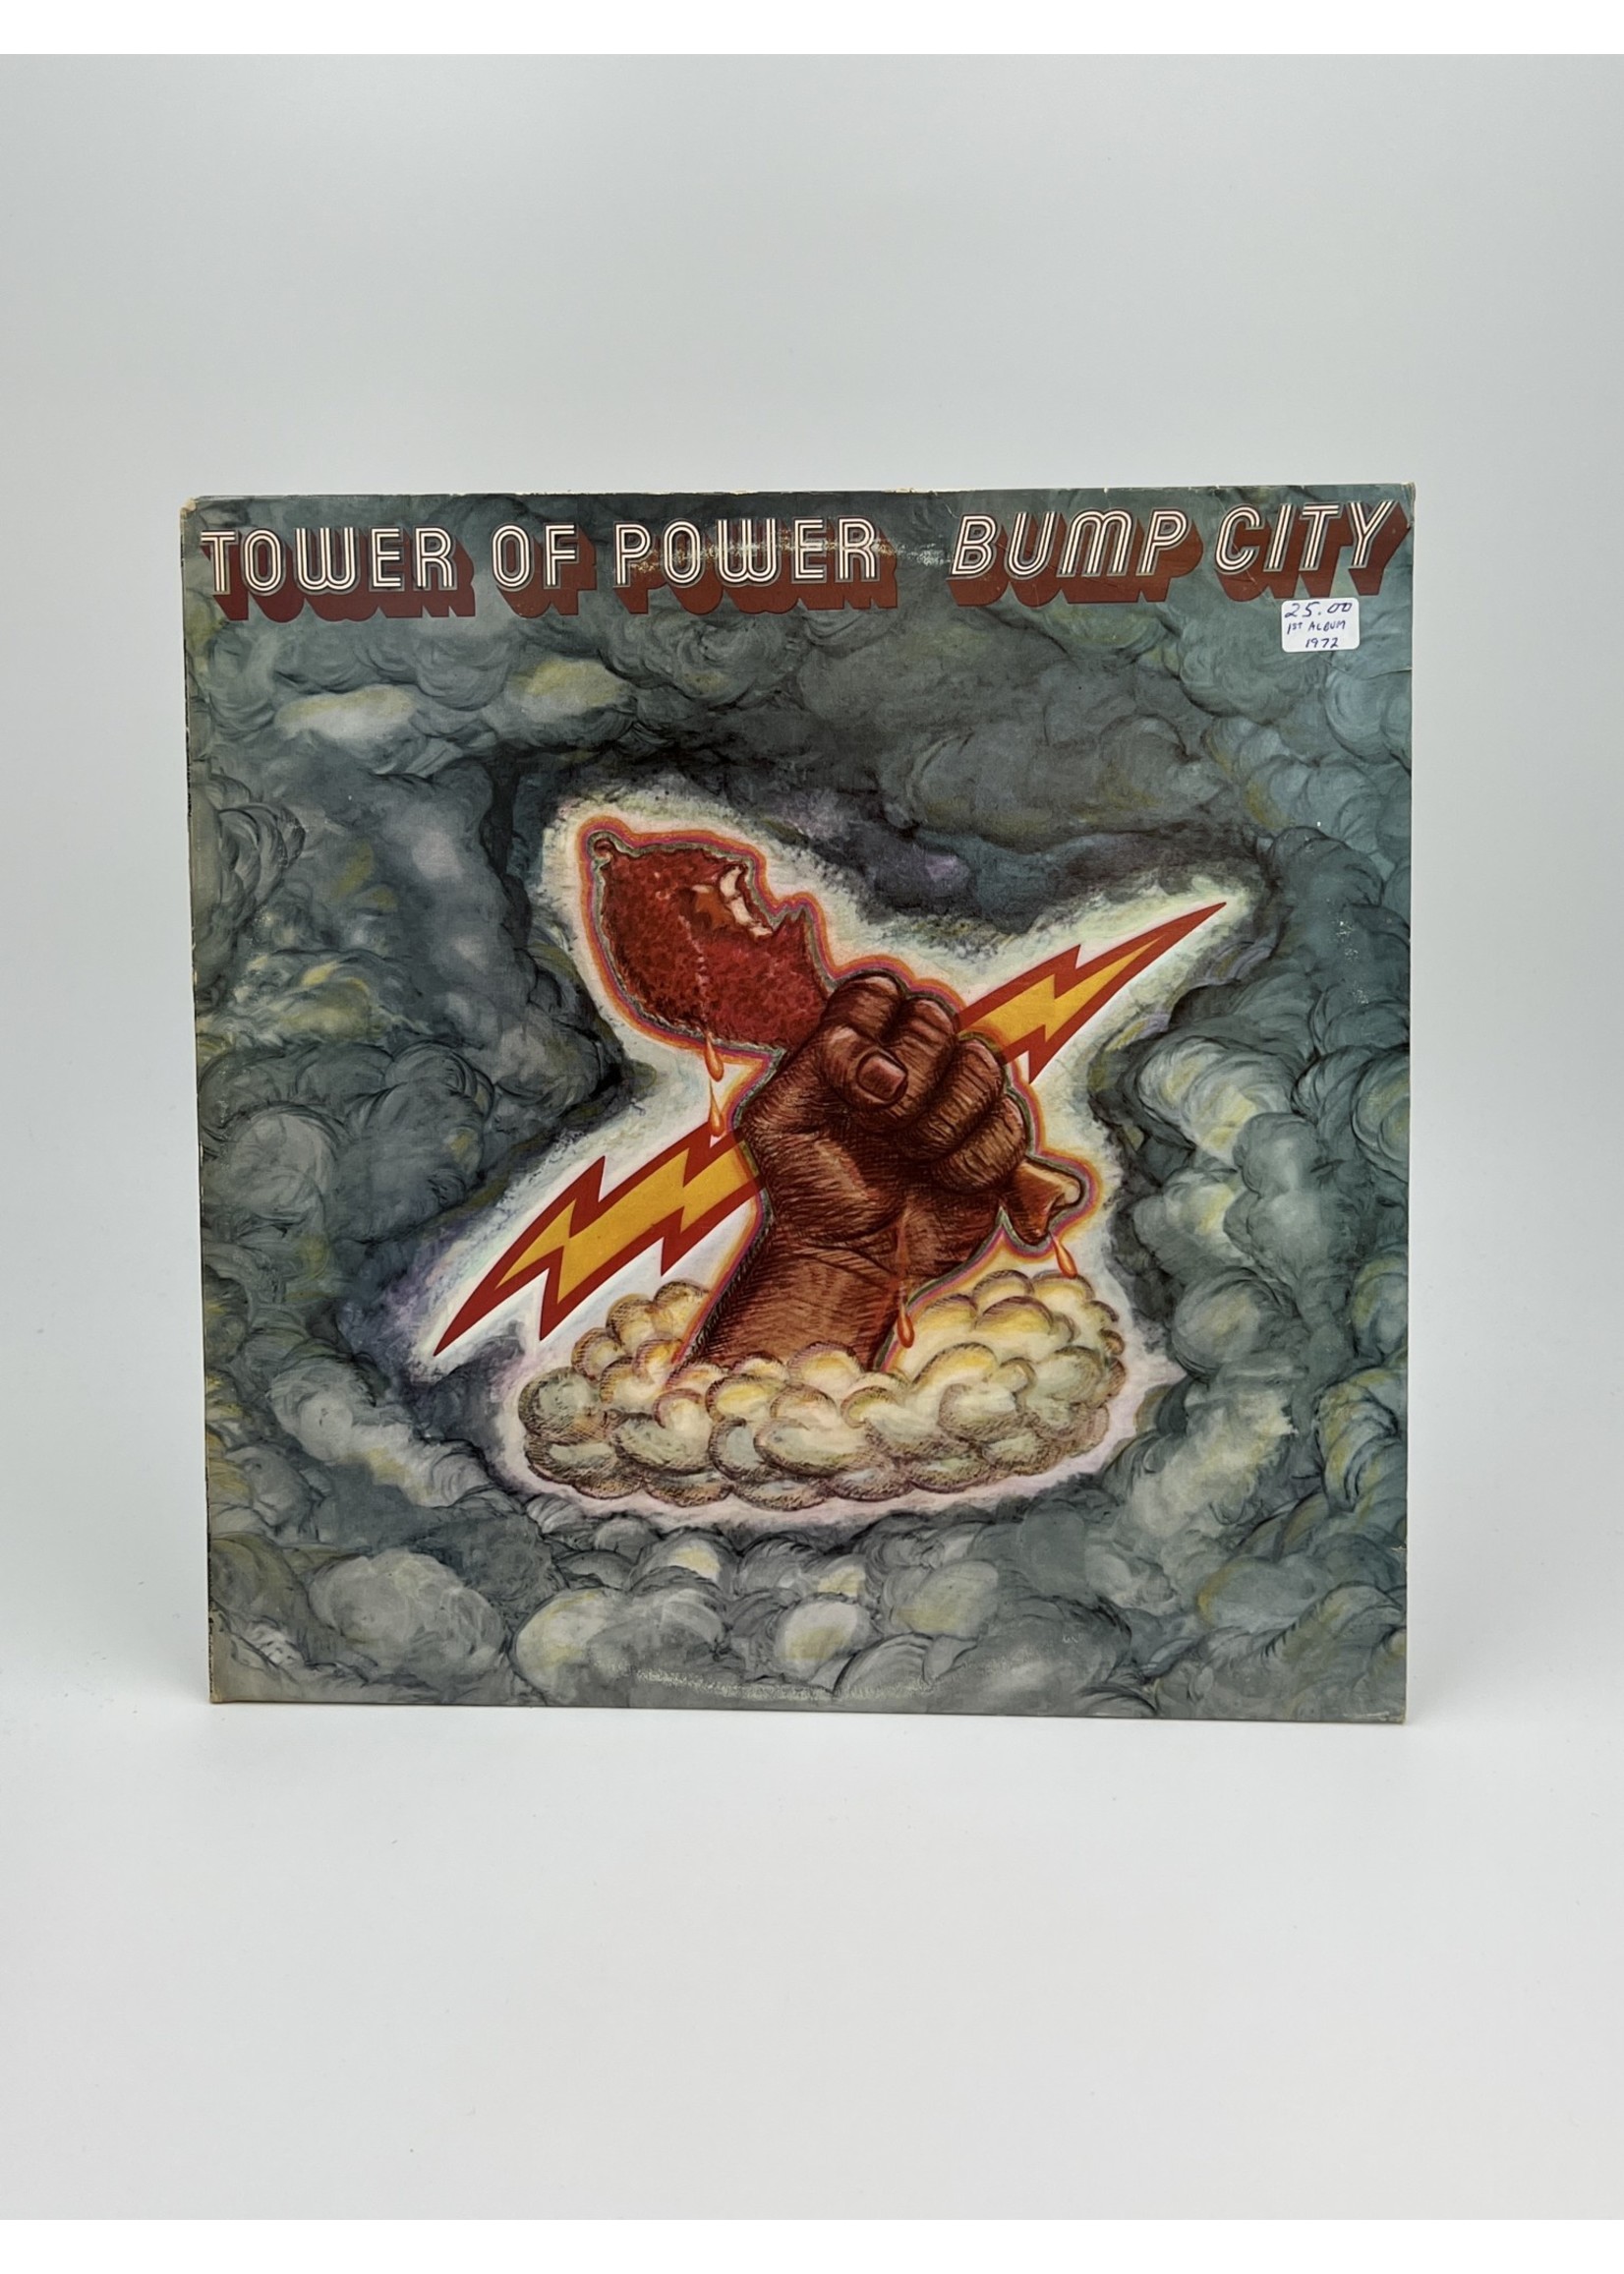 LP Tower of Power Bump City LP Record